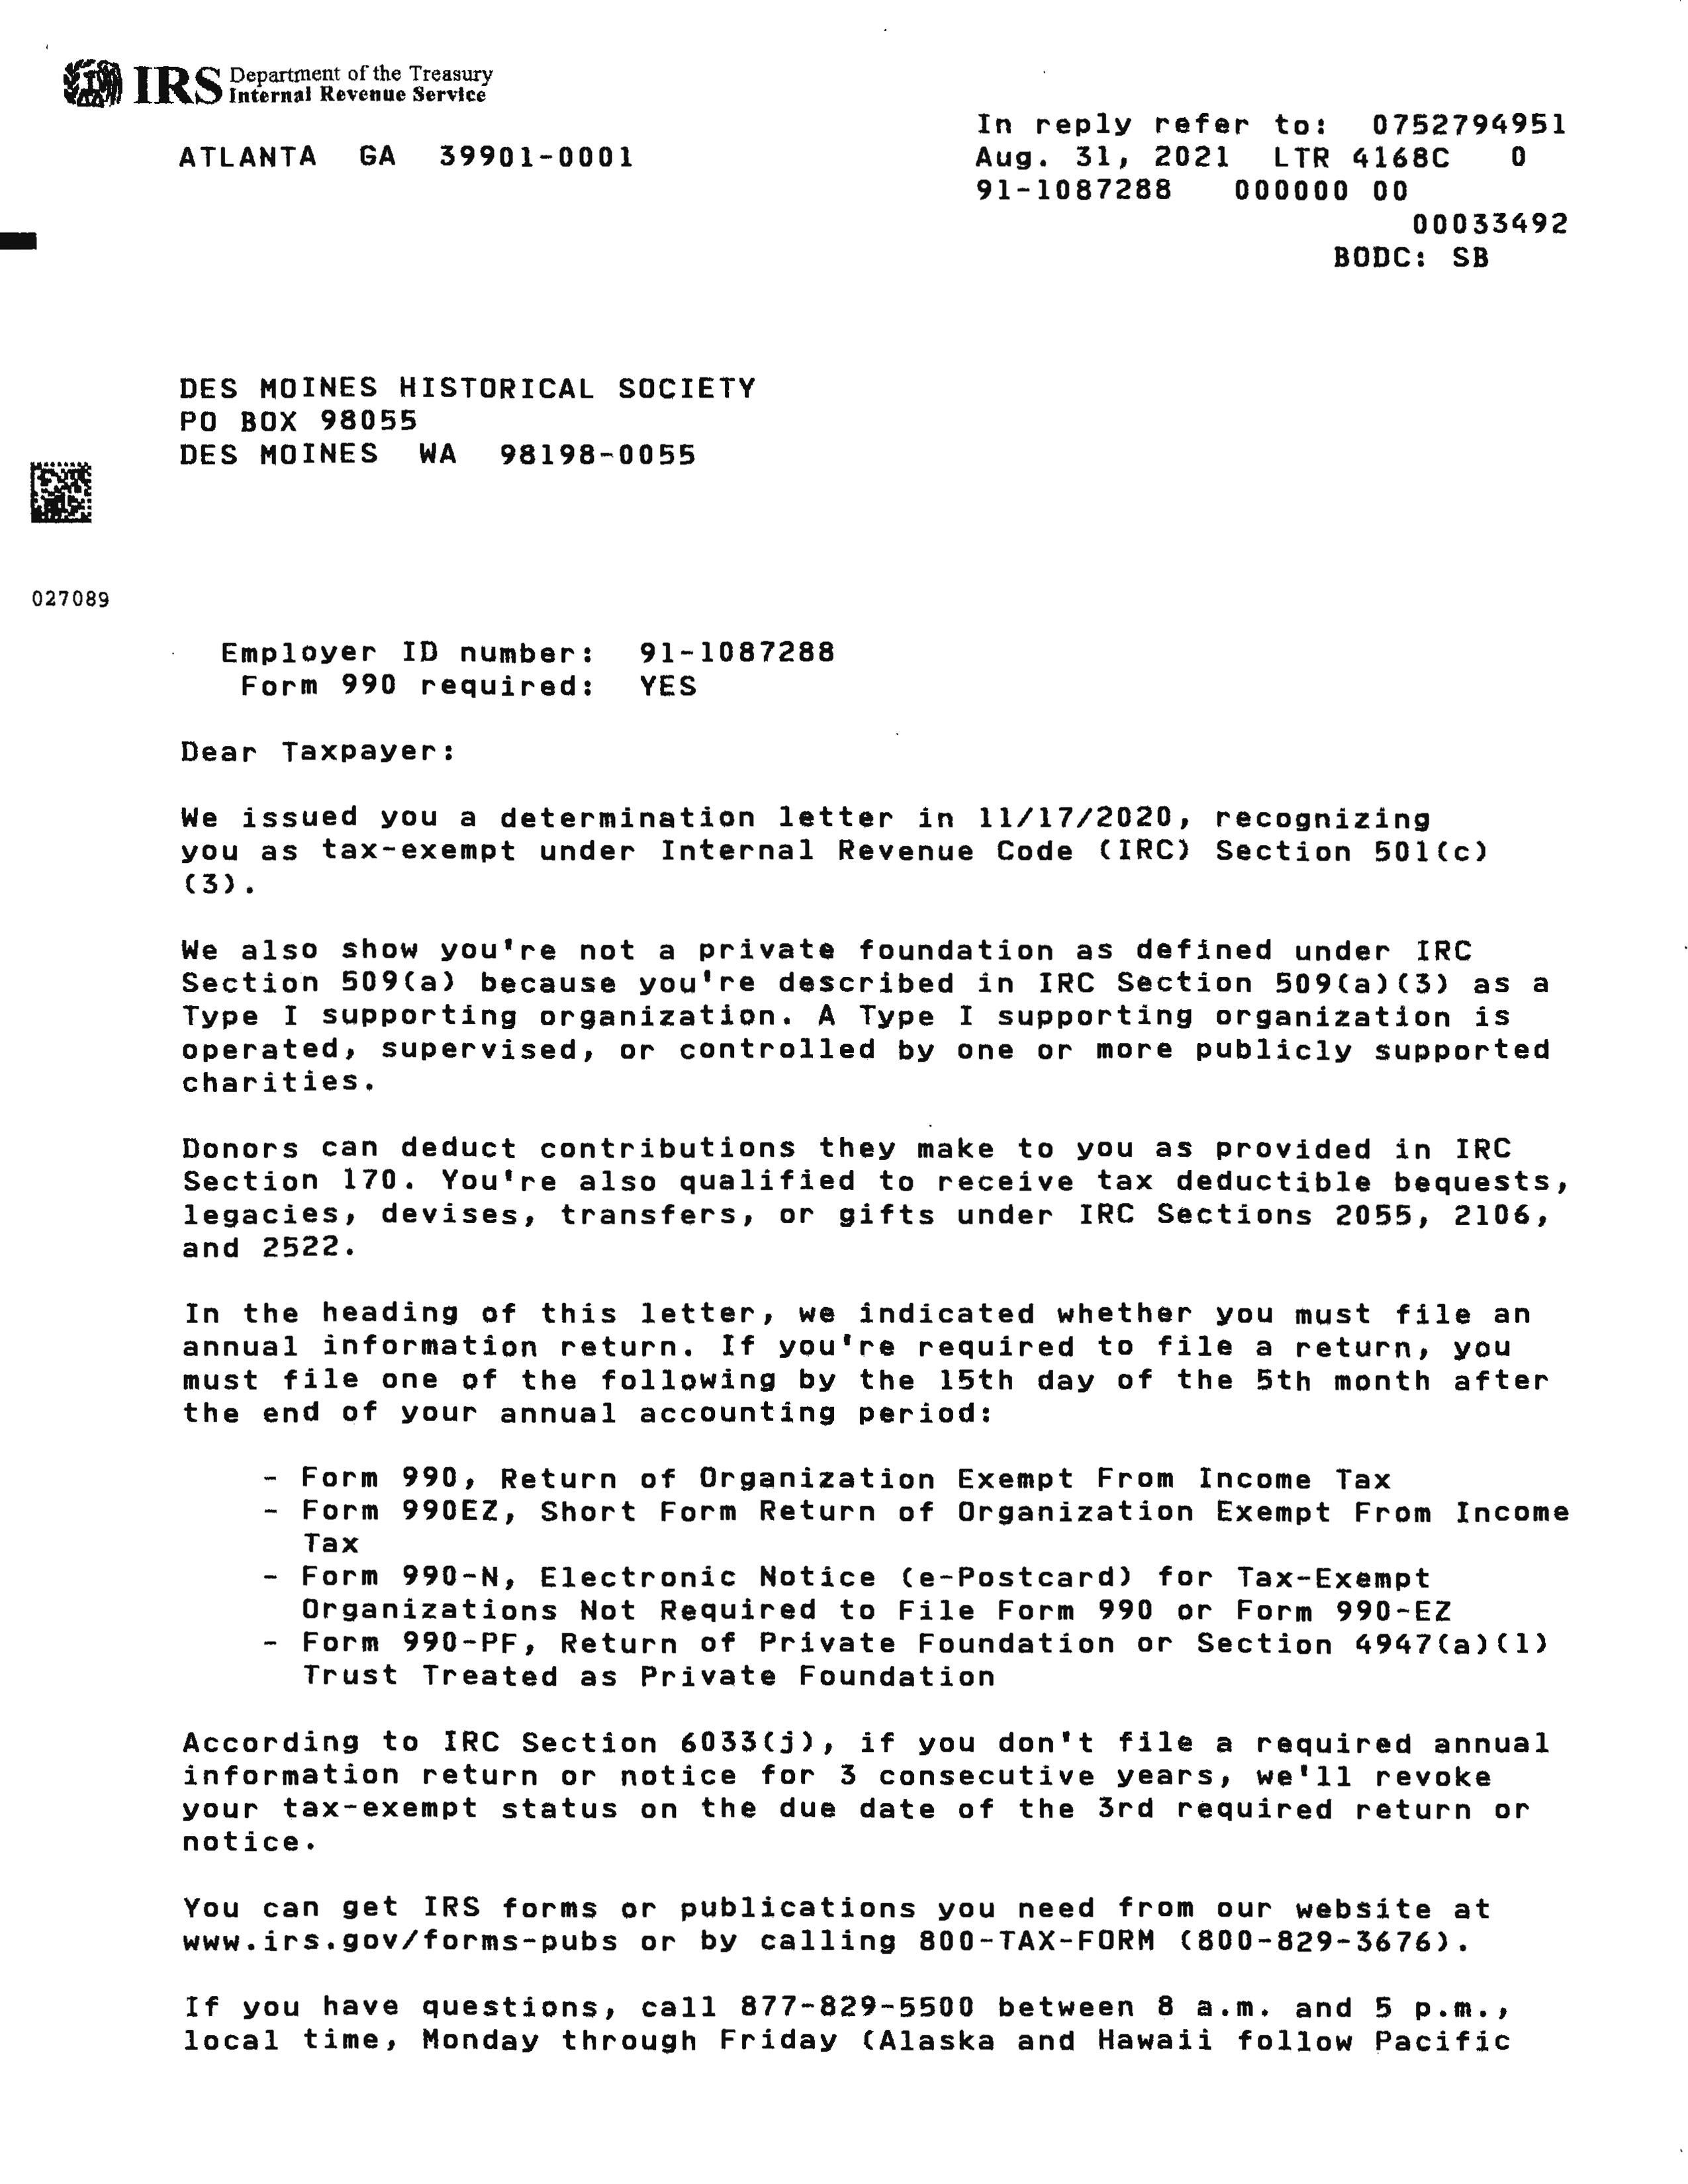 IRS Letter on Non-profit Status Page 1